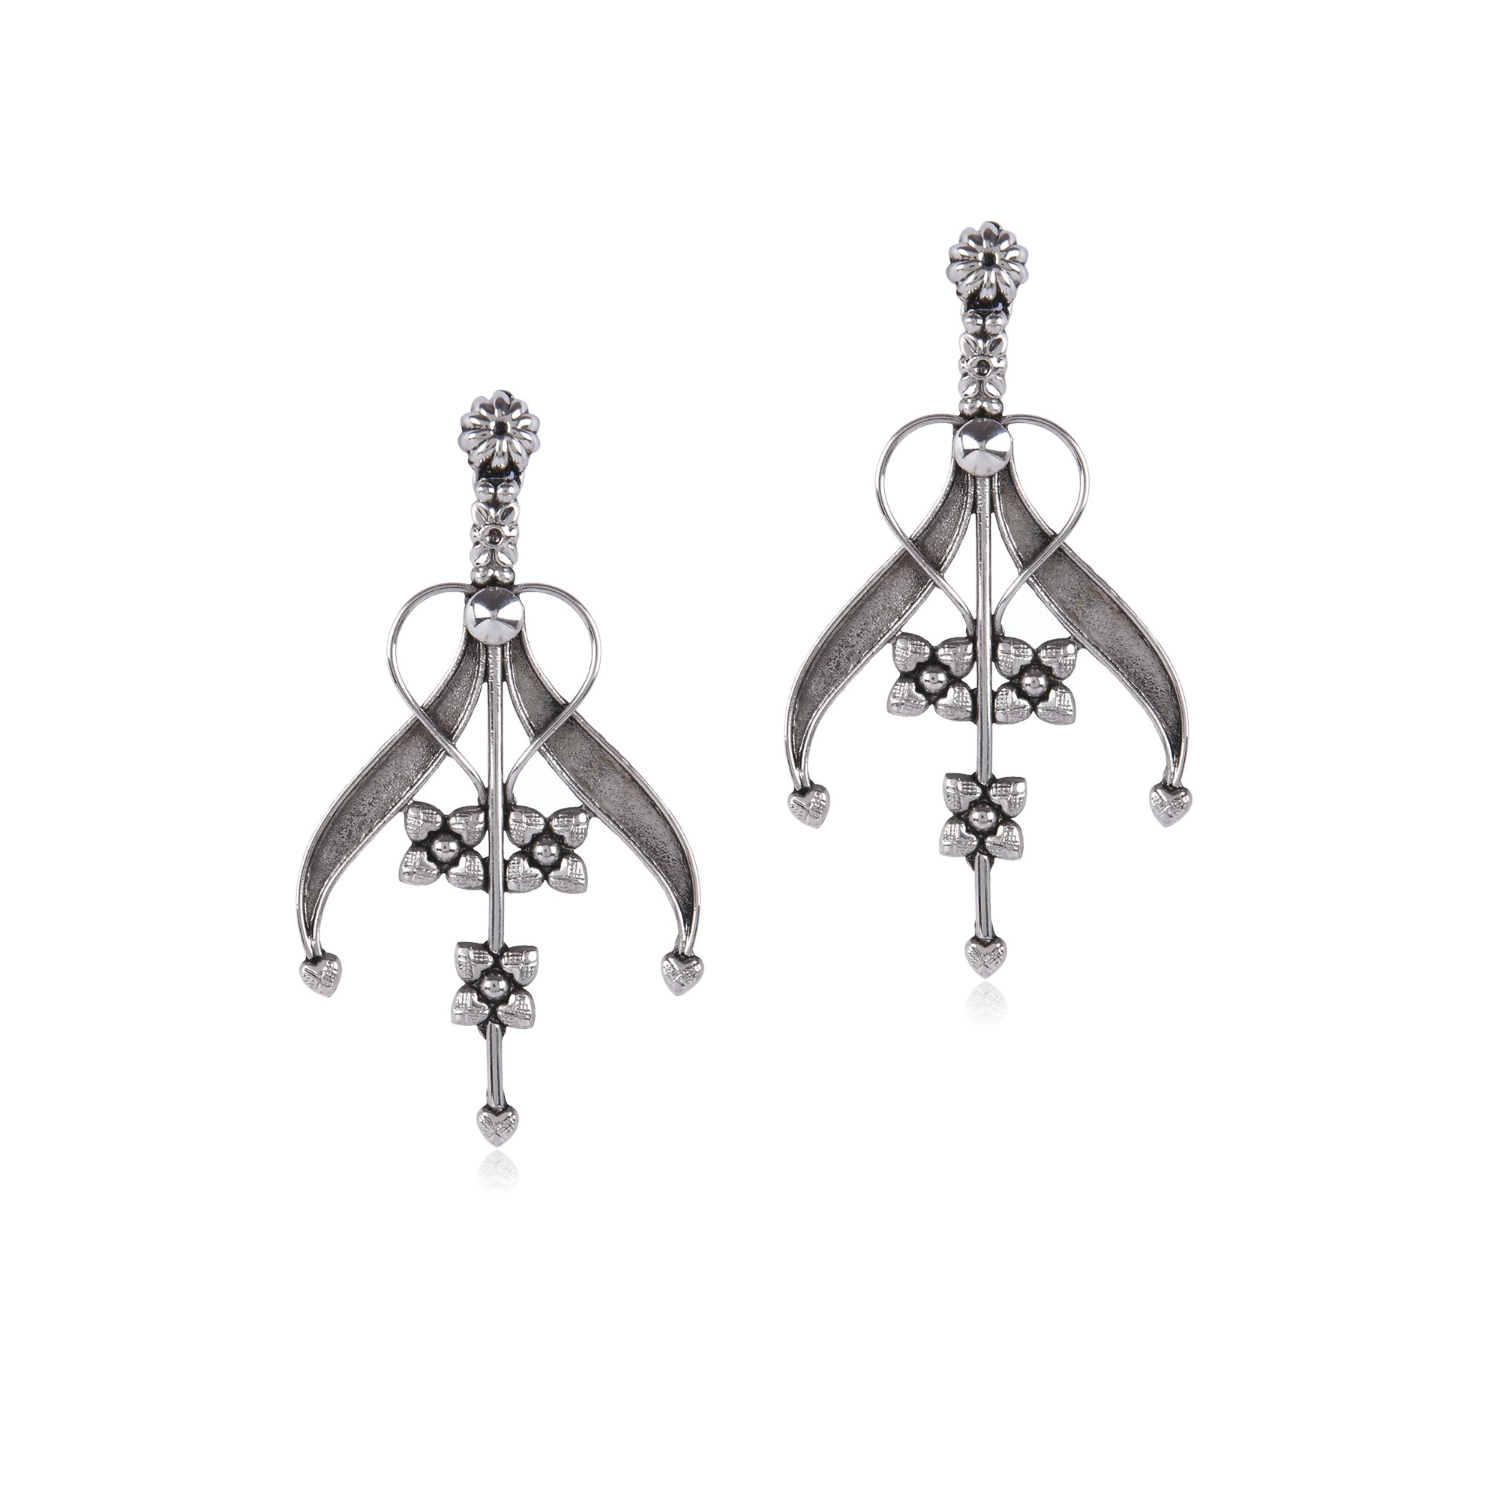 Antique Silver Lily Earrings